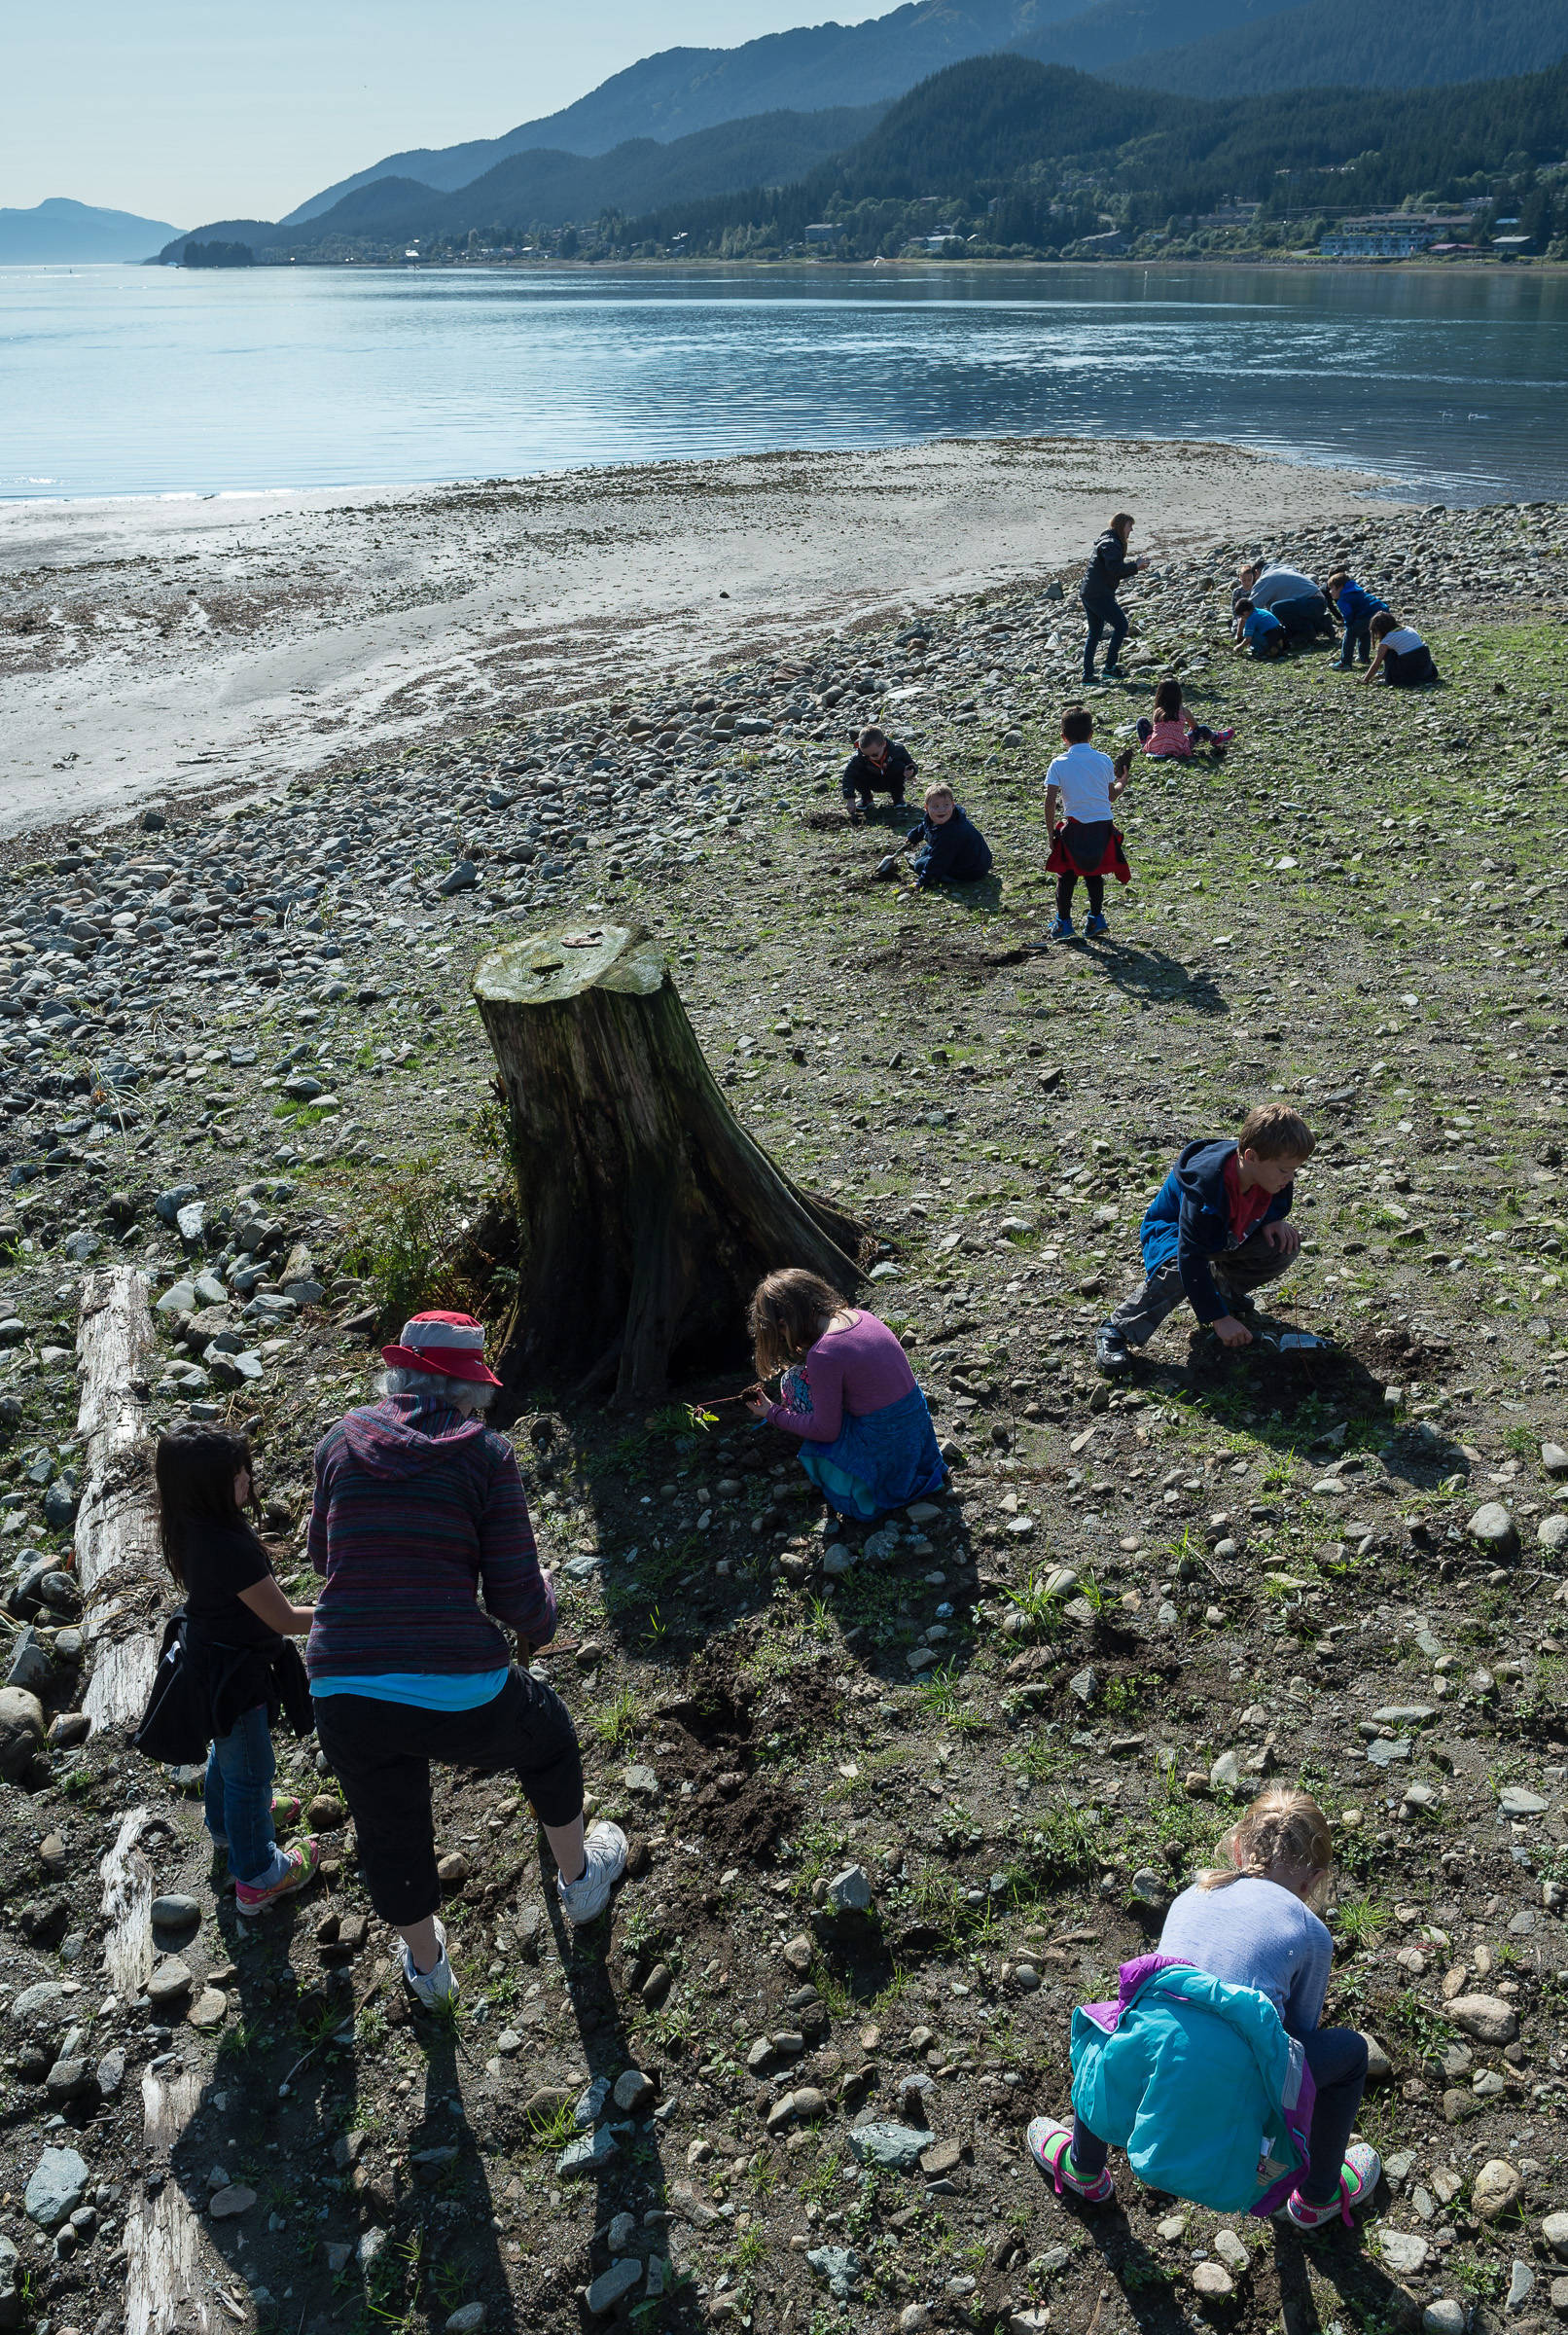 Harborview Elementary School first-graders plant willows and maples on a newly created island next to the Seawalk on Tuesday, Sept. 5, 2017. Harborview students will get a chance to plant 300 native species on the island over the next week to transform the area into habitat for birds. (Michael Penn | Juneau Empire)